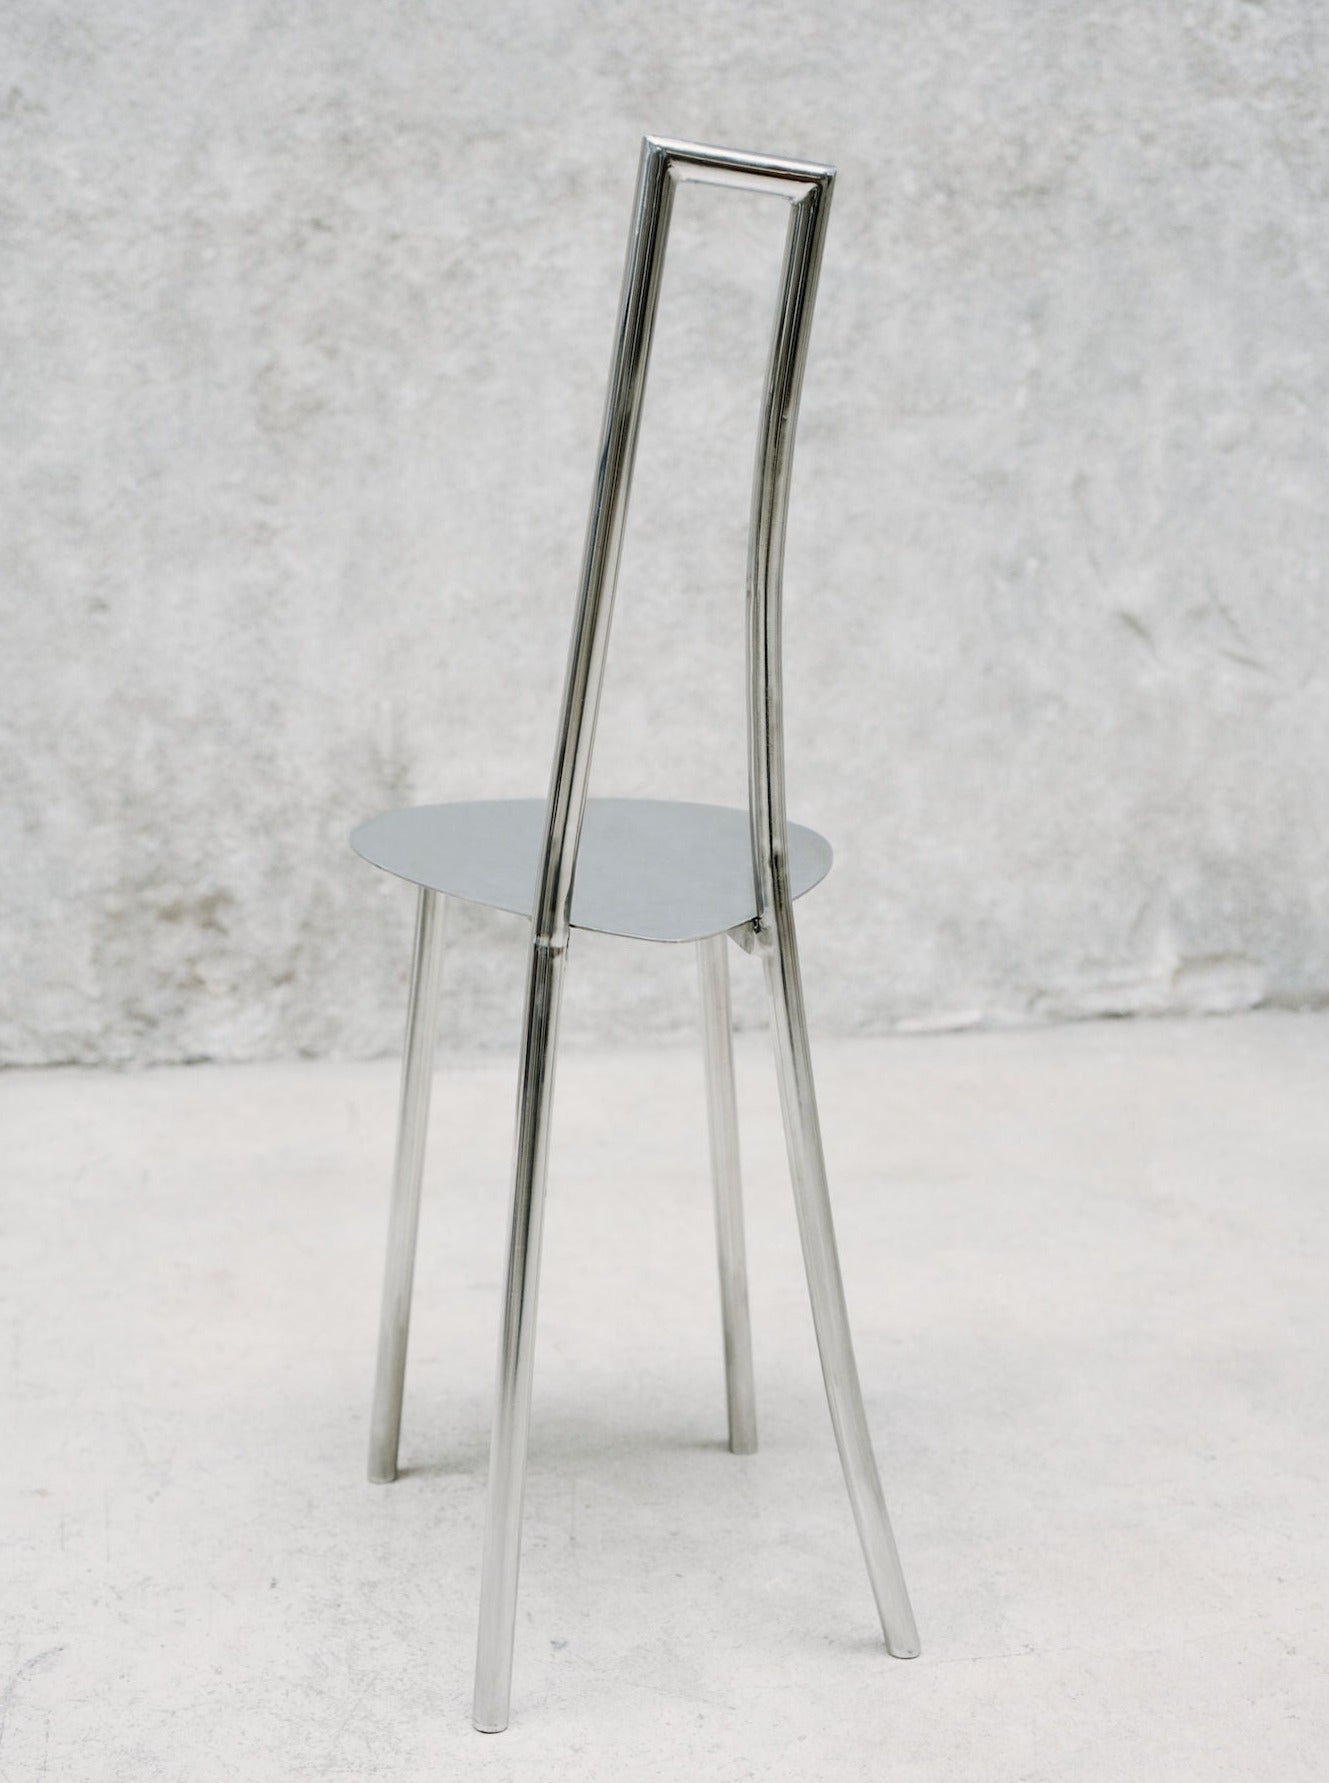 "Tumble" Chairs (tall back)